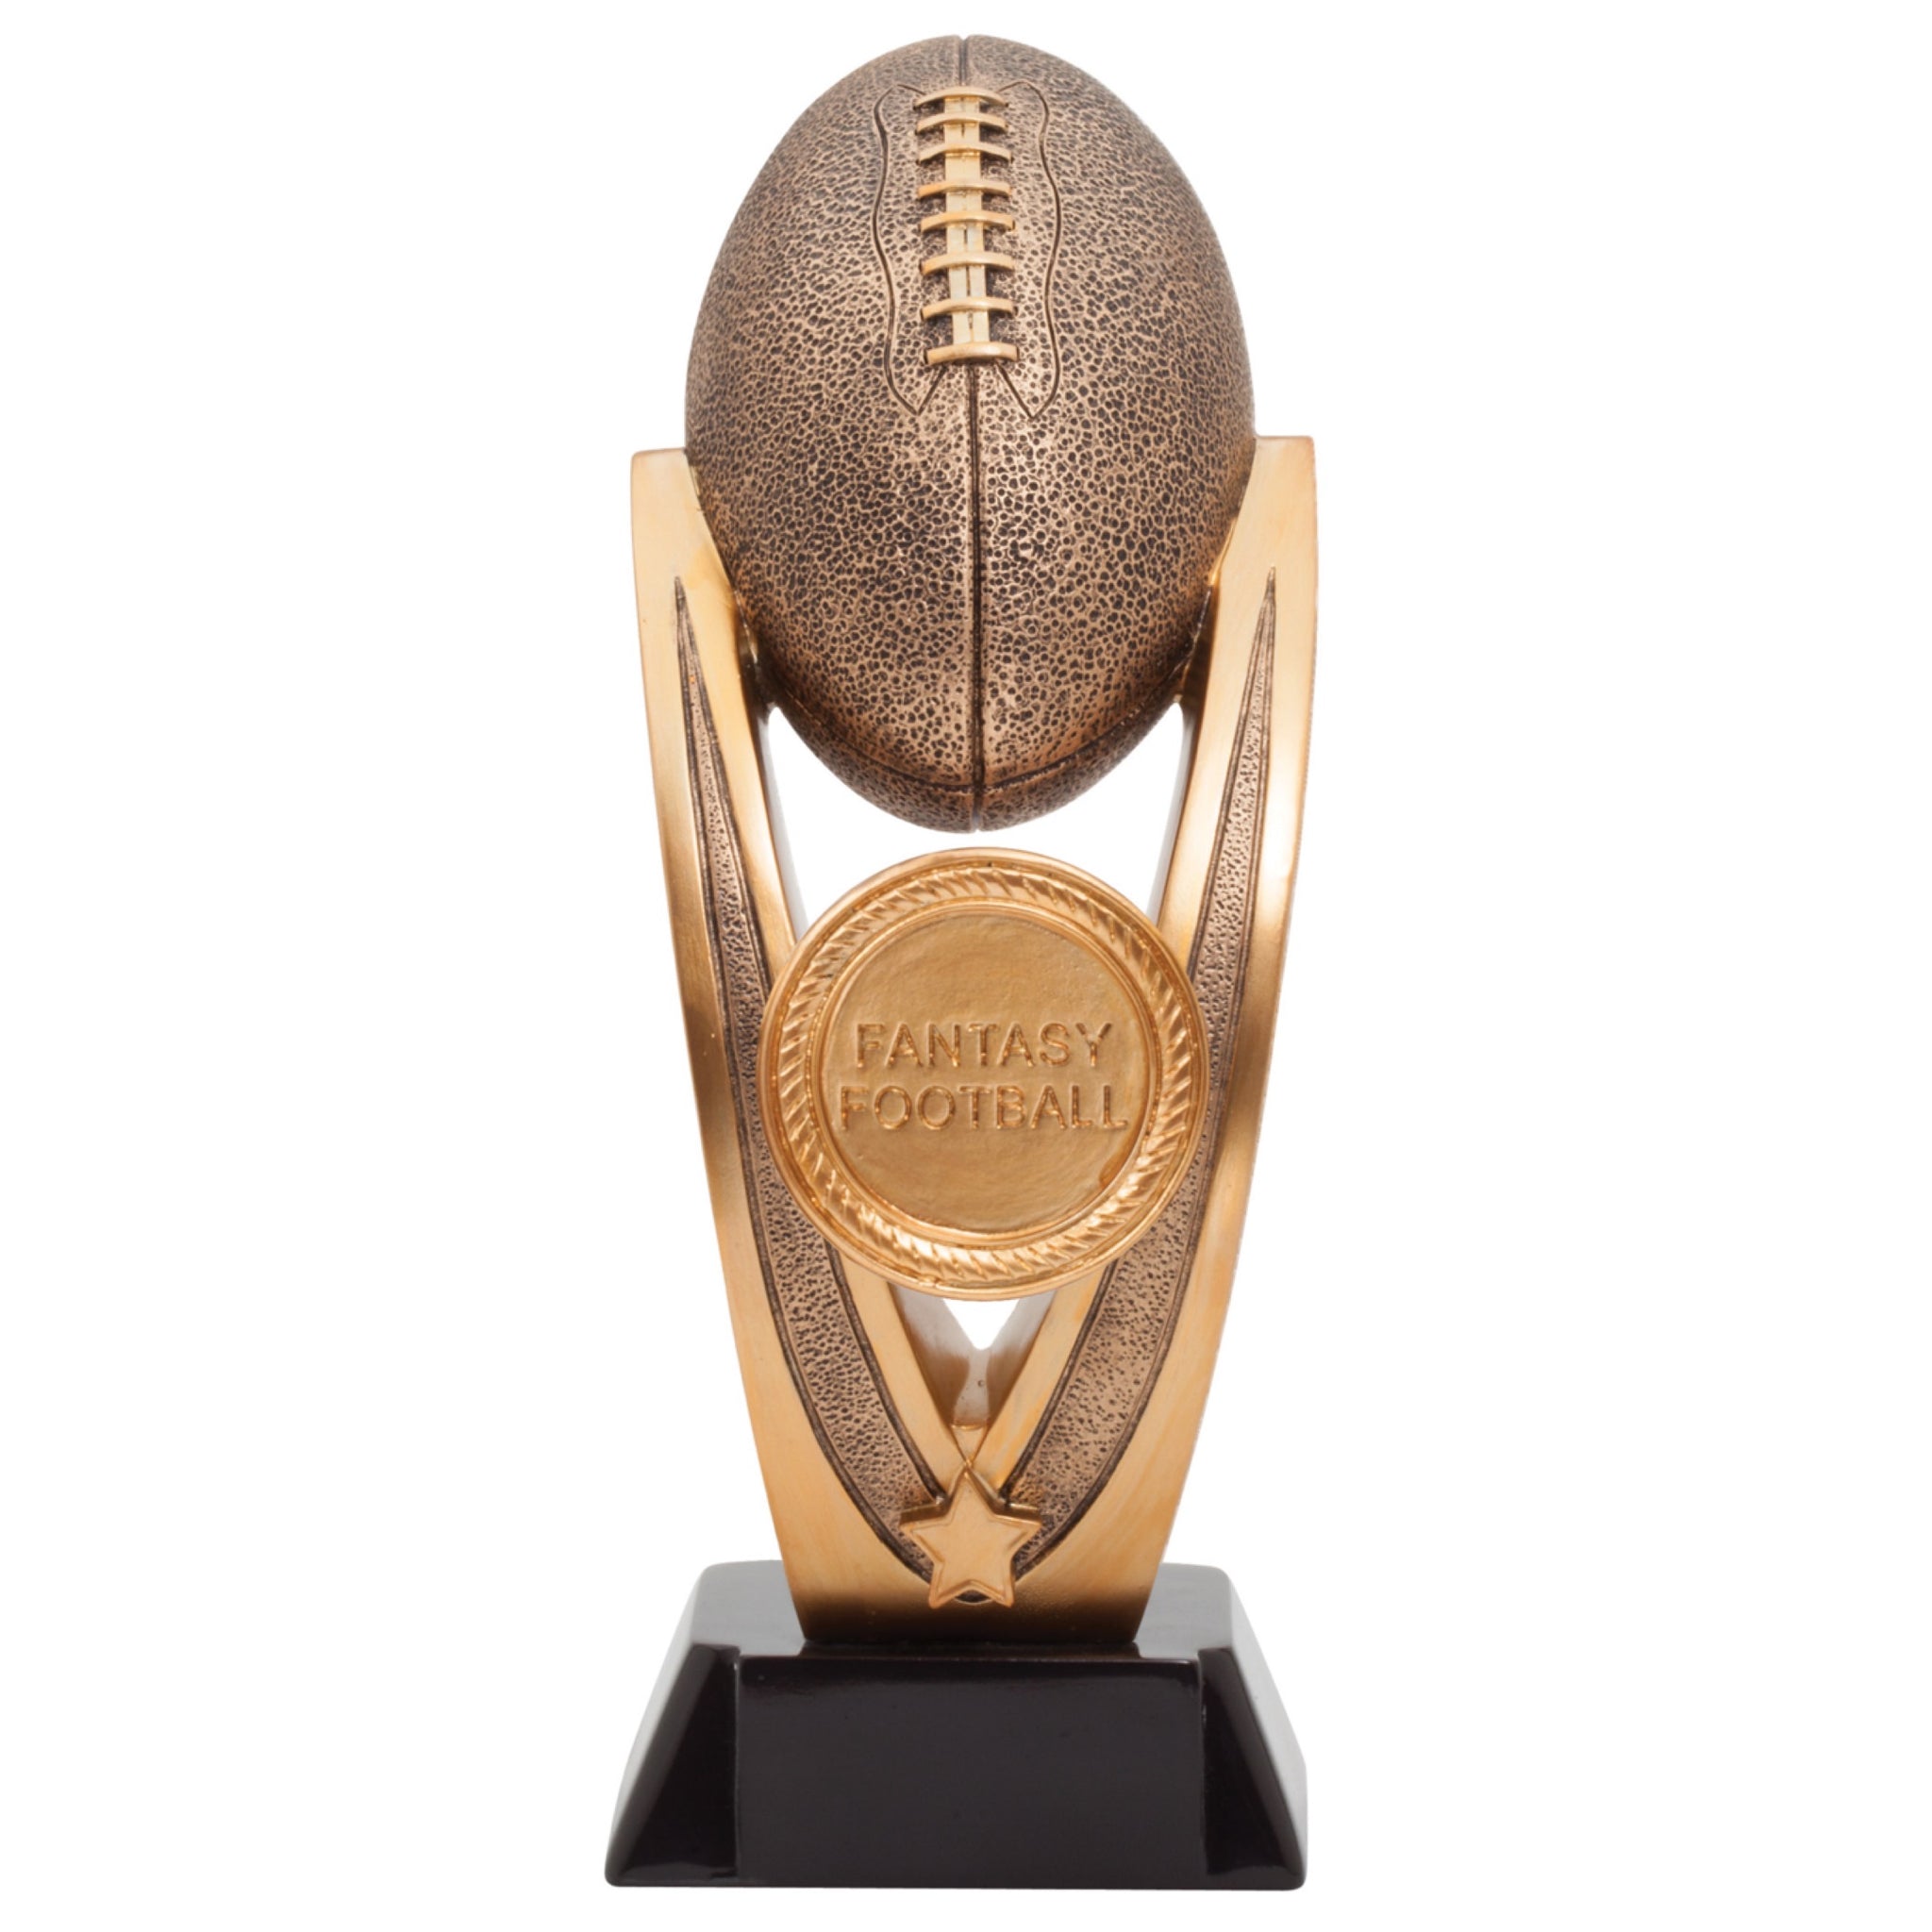 Large fantasy football award featring a black square base, a gold round medal in the middle that reads "Fantasy Football" and a large bronze football at the top held up by two posts.